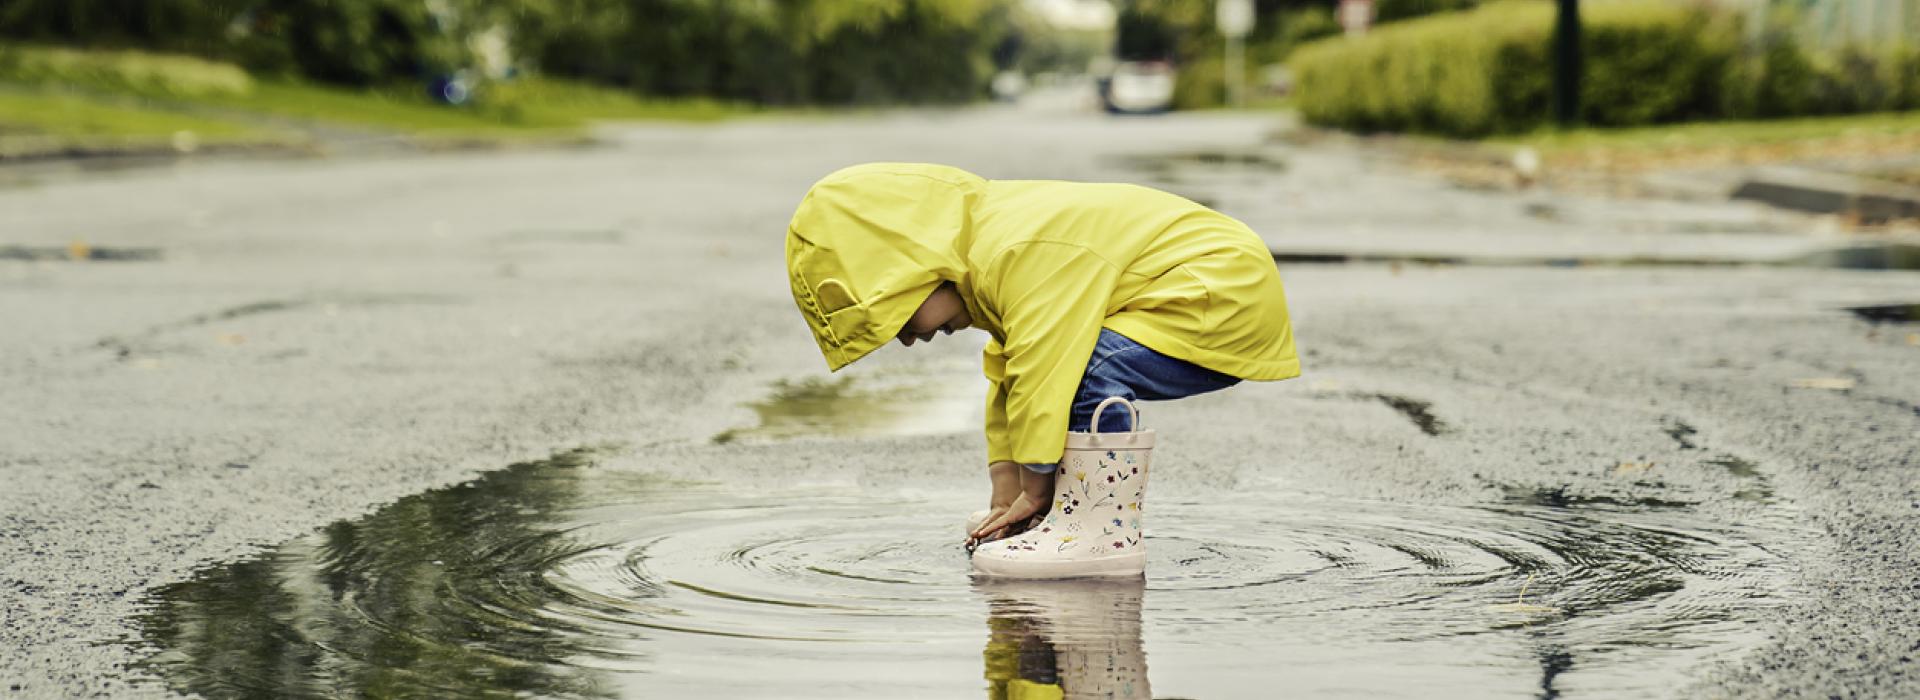 A toddler plays in a rain puddle in a bright yellow rainjacket